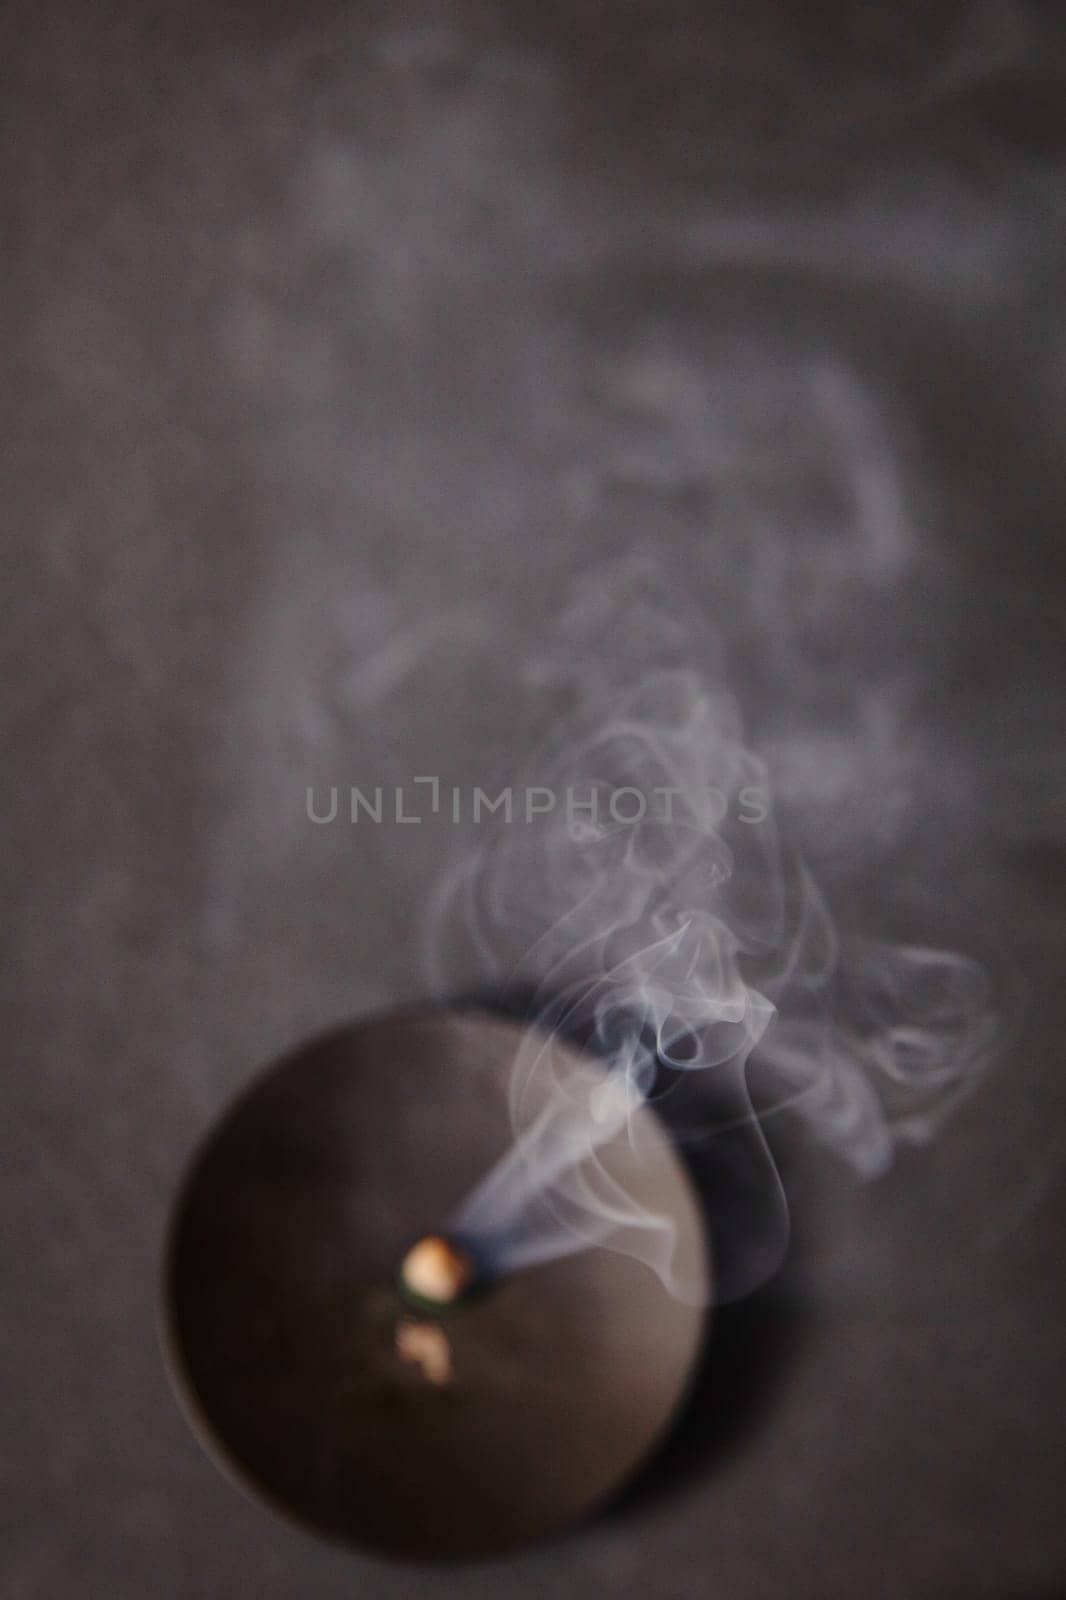 Incense from Above with Rising Smoke in Subdued Indoor Lighting by njproductions